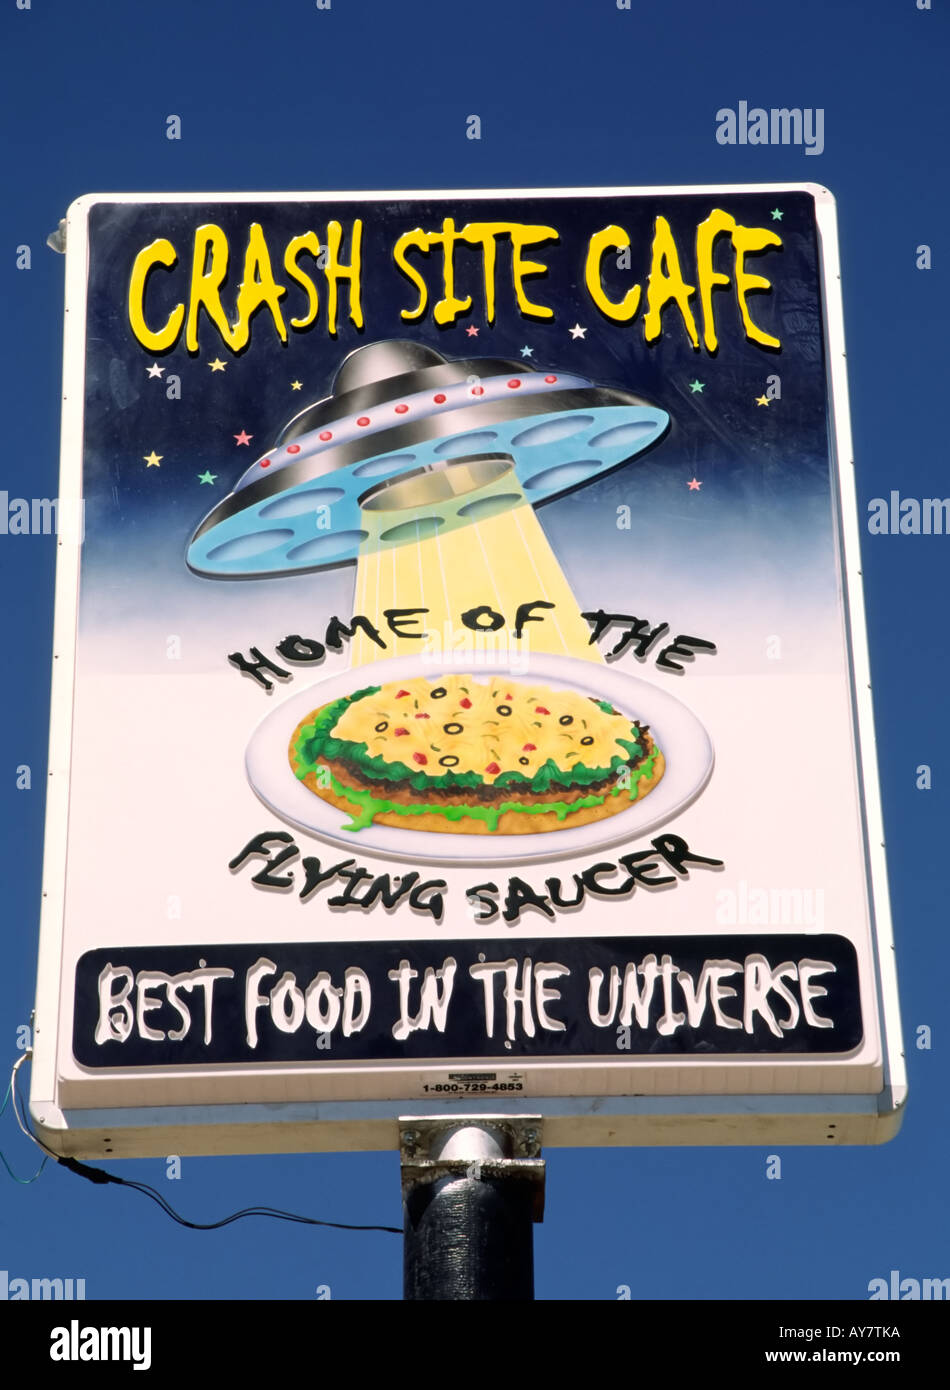 The Crash Site Cafe serves up unusual intergalactic food fare in Roswell, New Mexico. Stock Photo